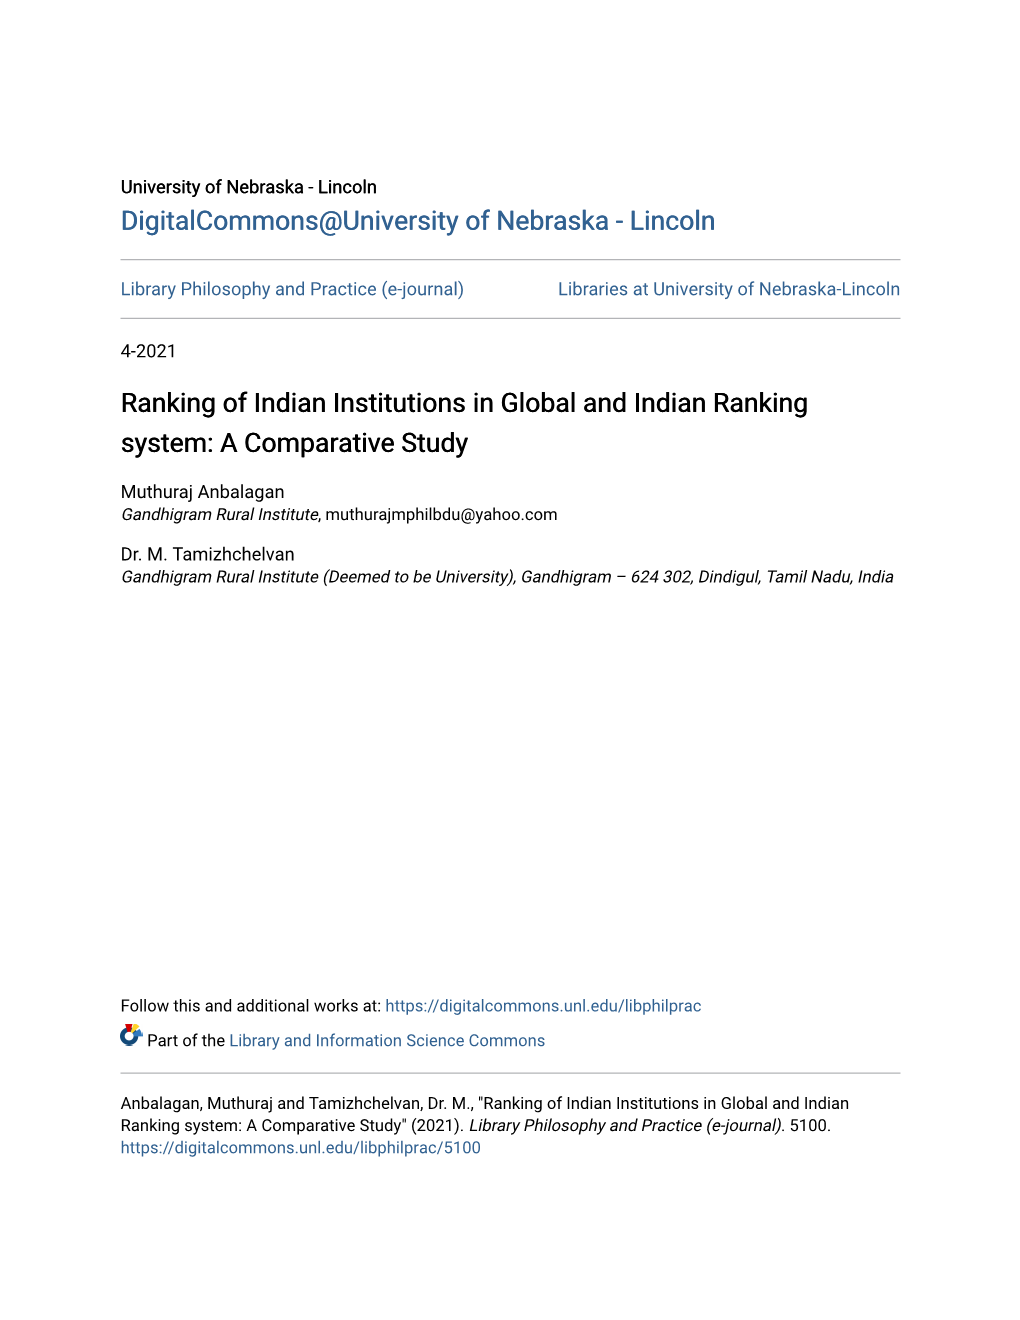 Ranking of Indian Institutions in Global and Indian Ranking System: a Comparative Study